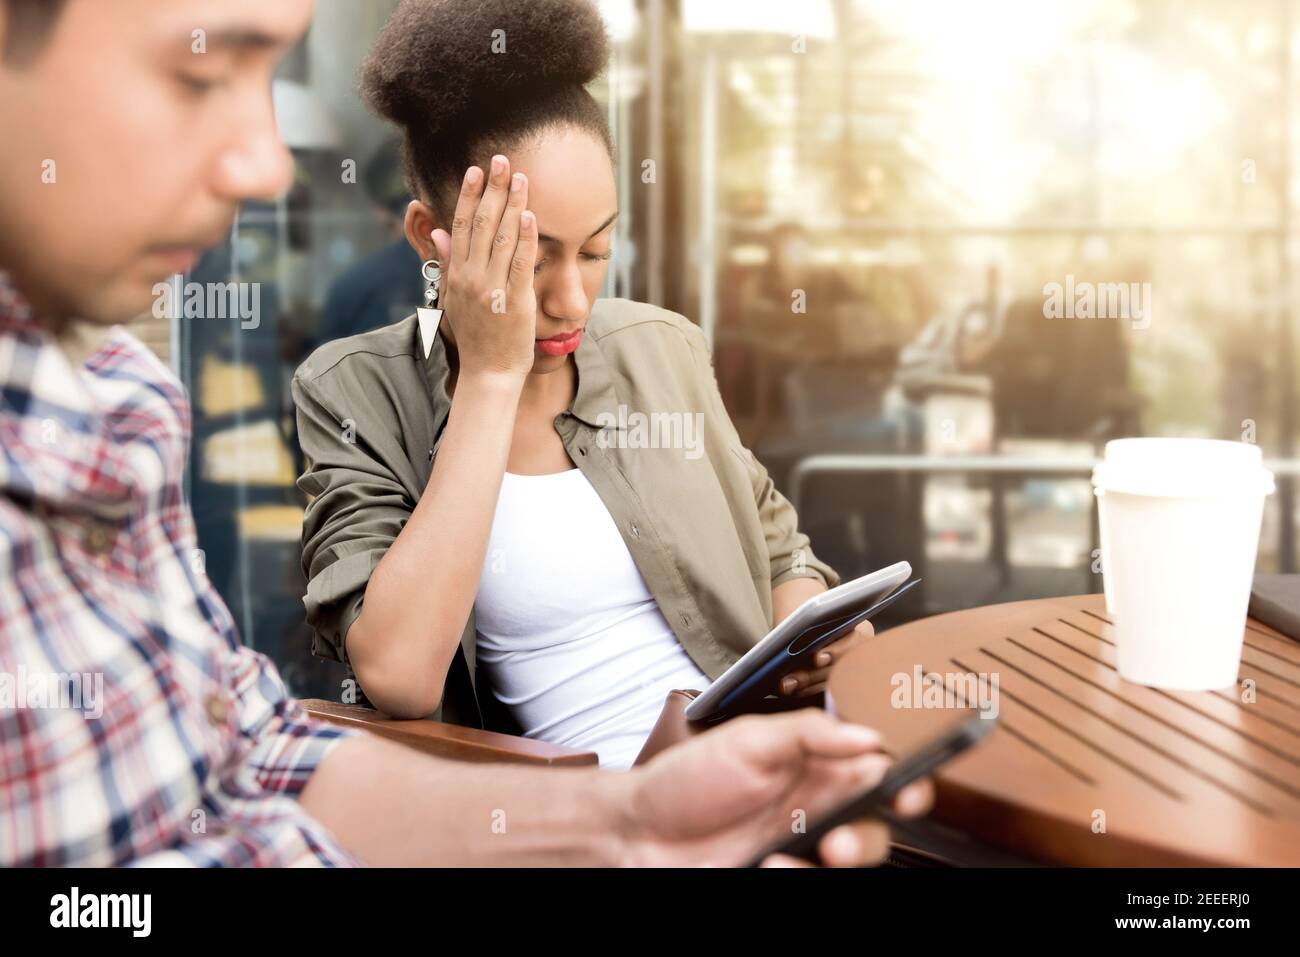 People seriously concentrating on using smartphone while sitting in coffee shop - social media addiction concept Stock Photo